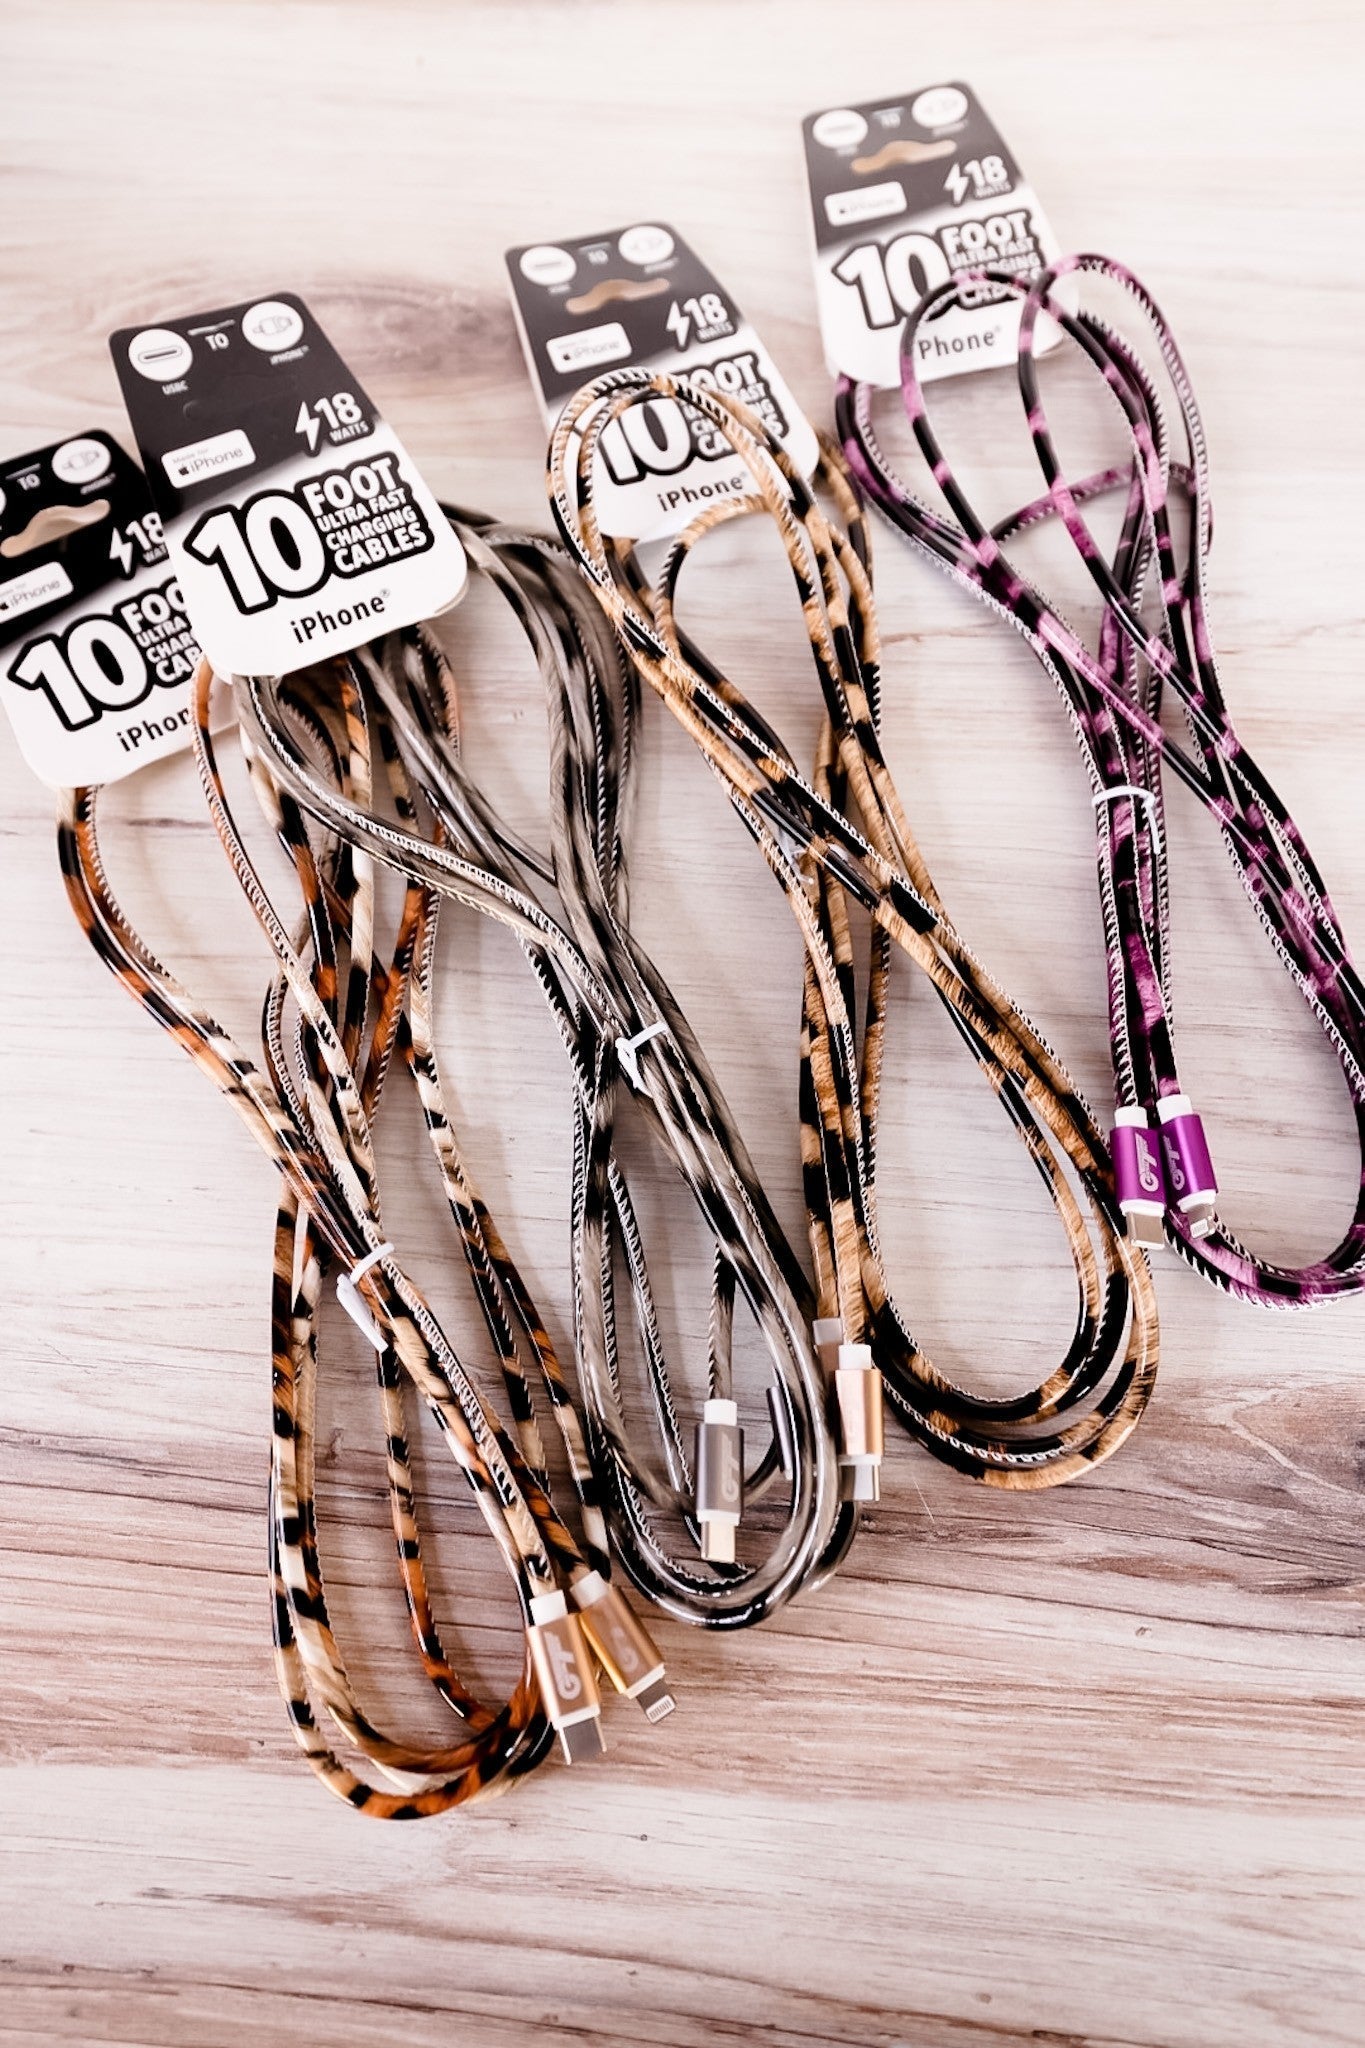 Lightening Fast iPhone 10ft Cable Leopard Mix (Assorted) - Whiskey Skies